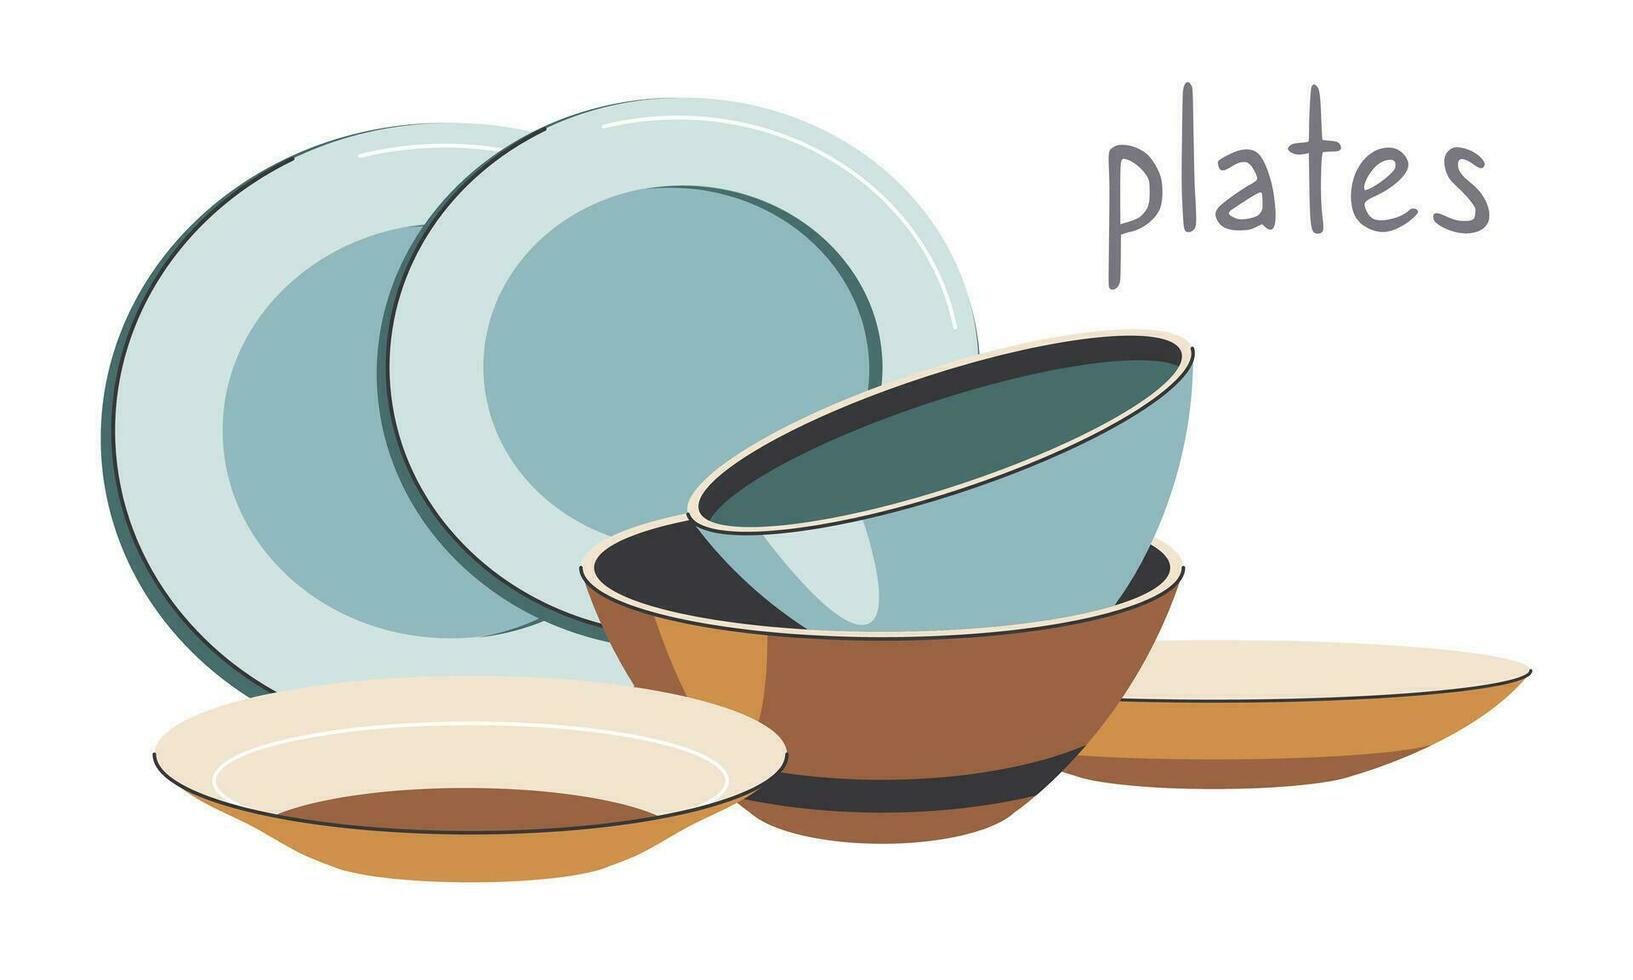 Empty plates and bowls isolated on a white background vector illustration.